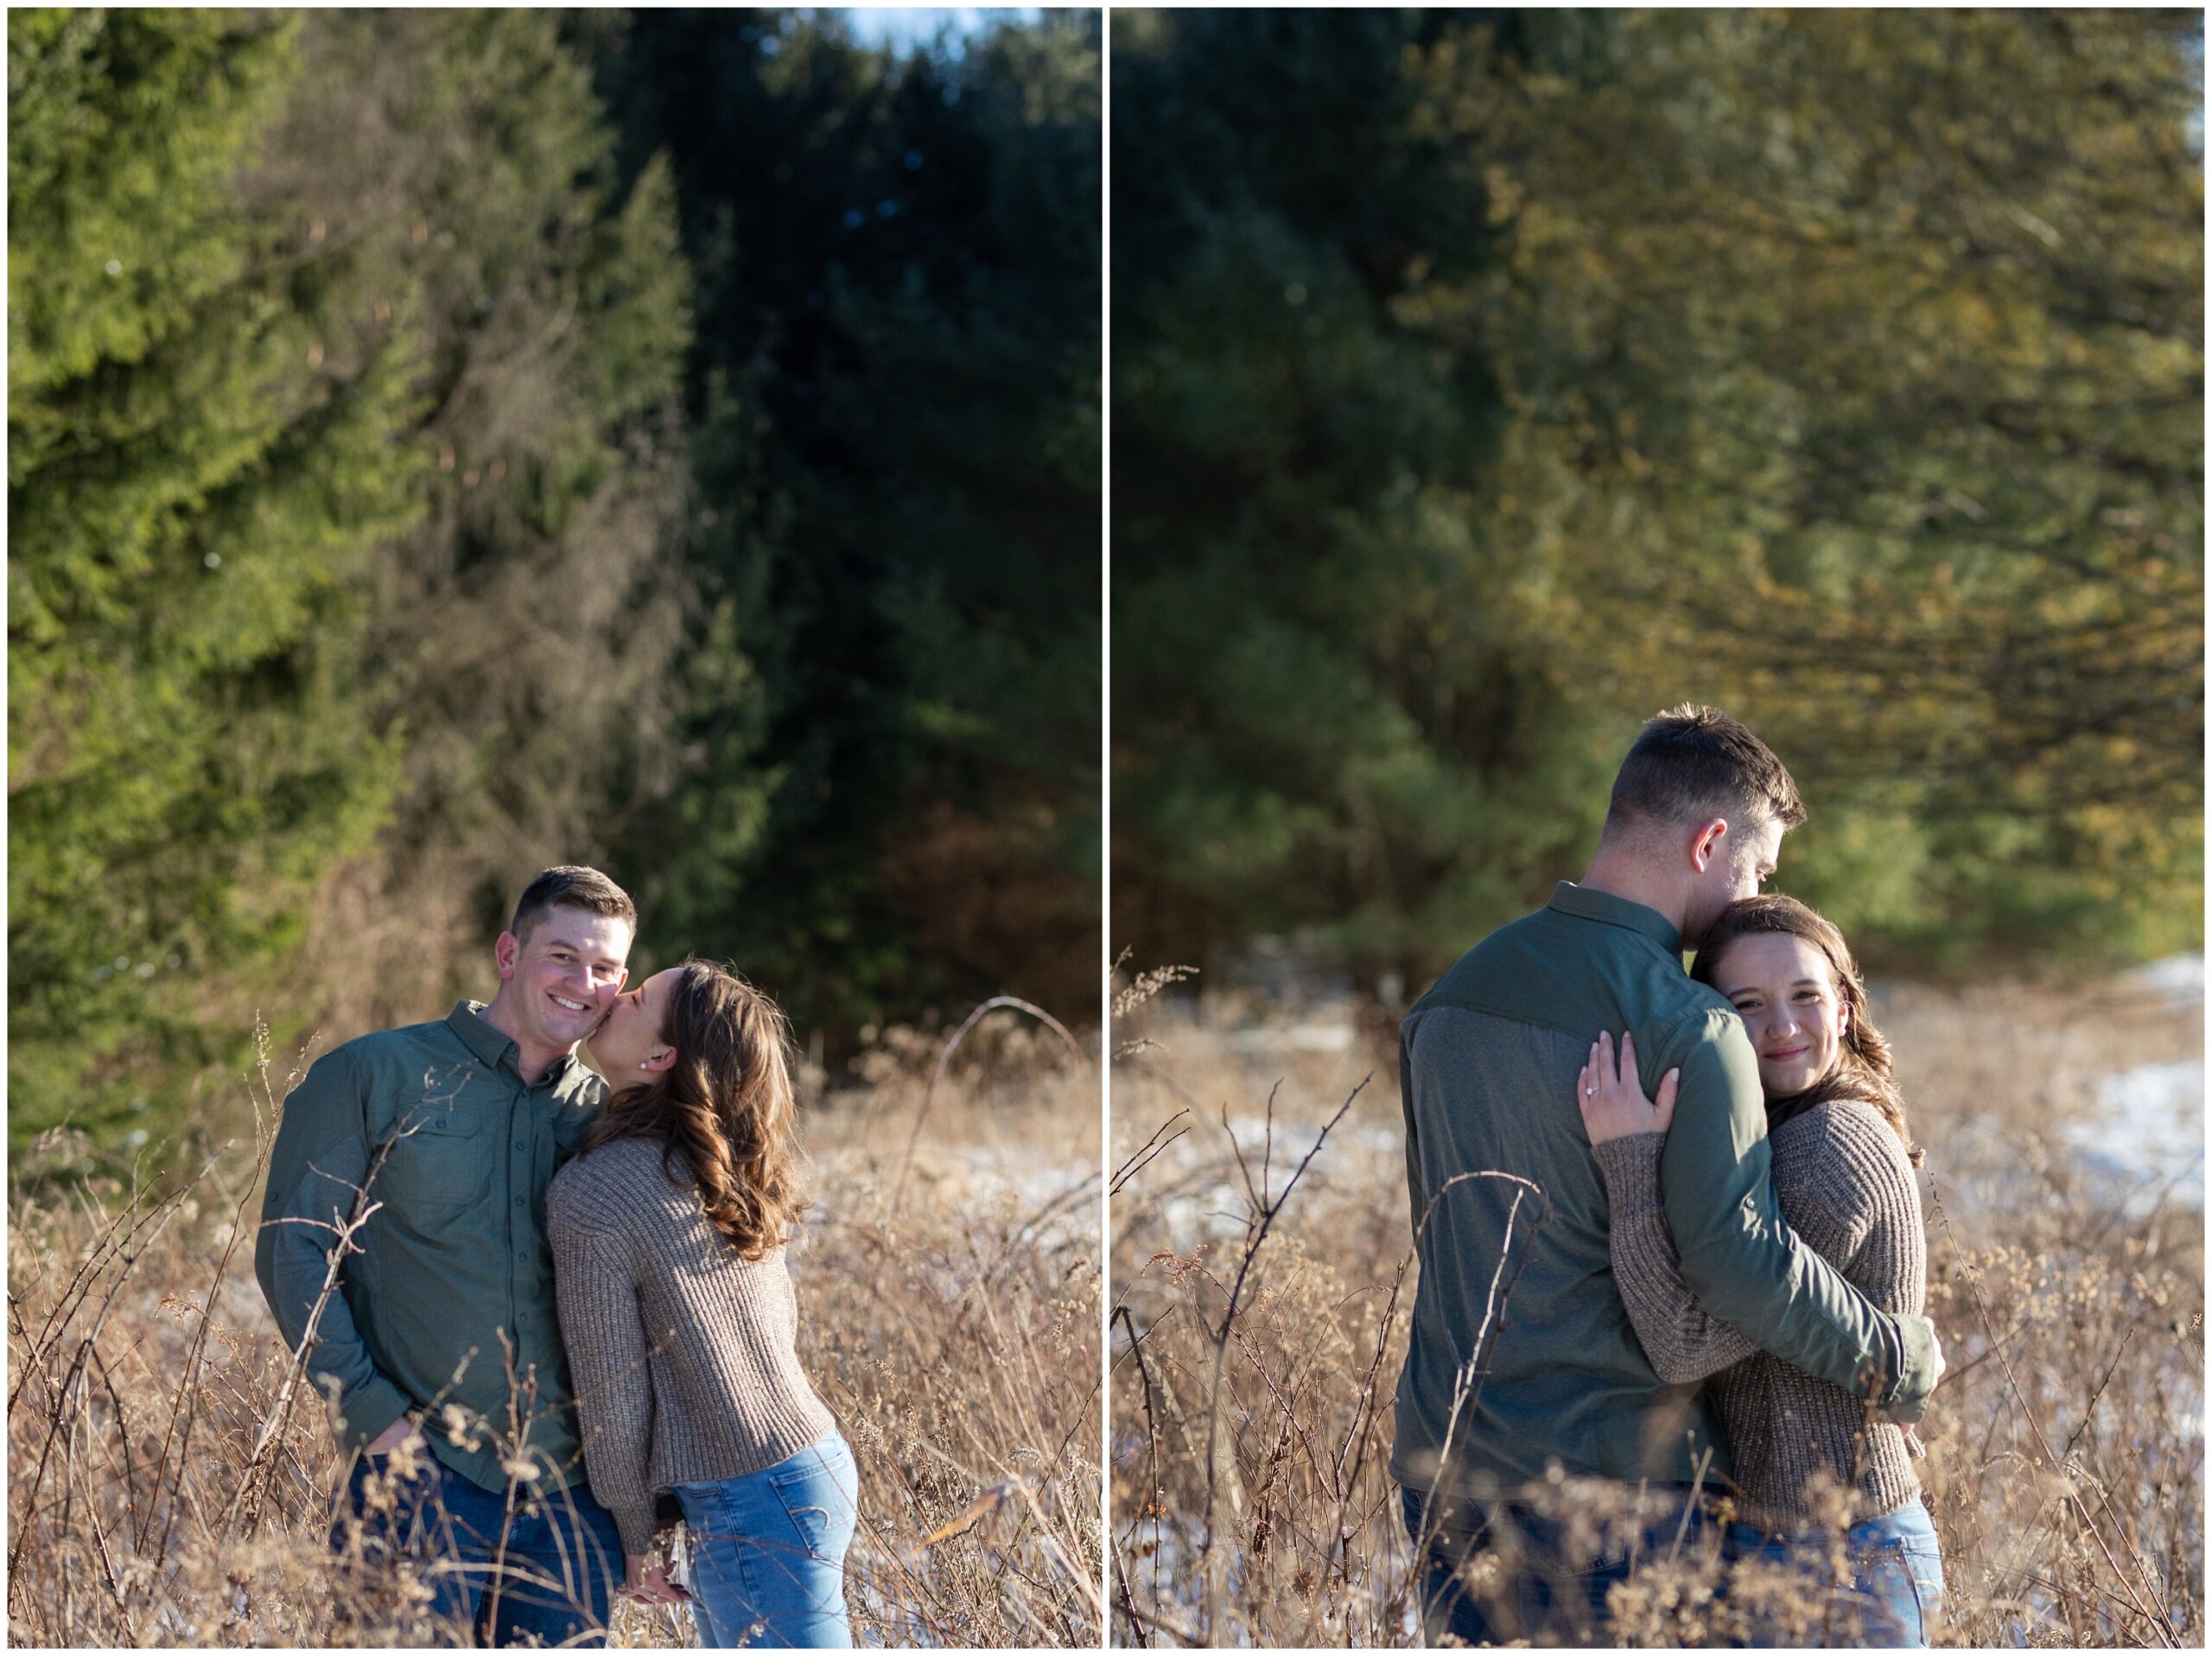 Outdoor Winter Engagement Session in Pittsburgh, PA Photographer by Pittsburgh Wedding & Engagement Photographer Acevedo Weddings